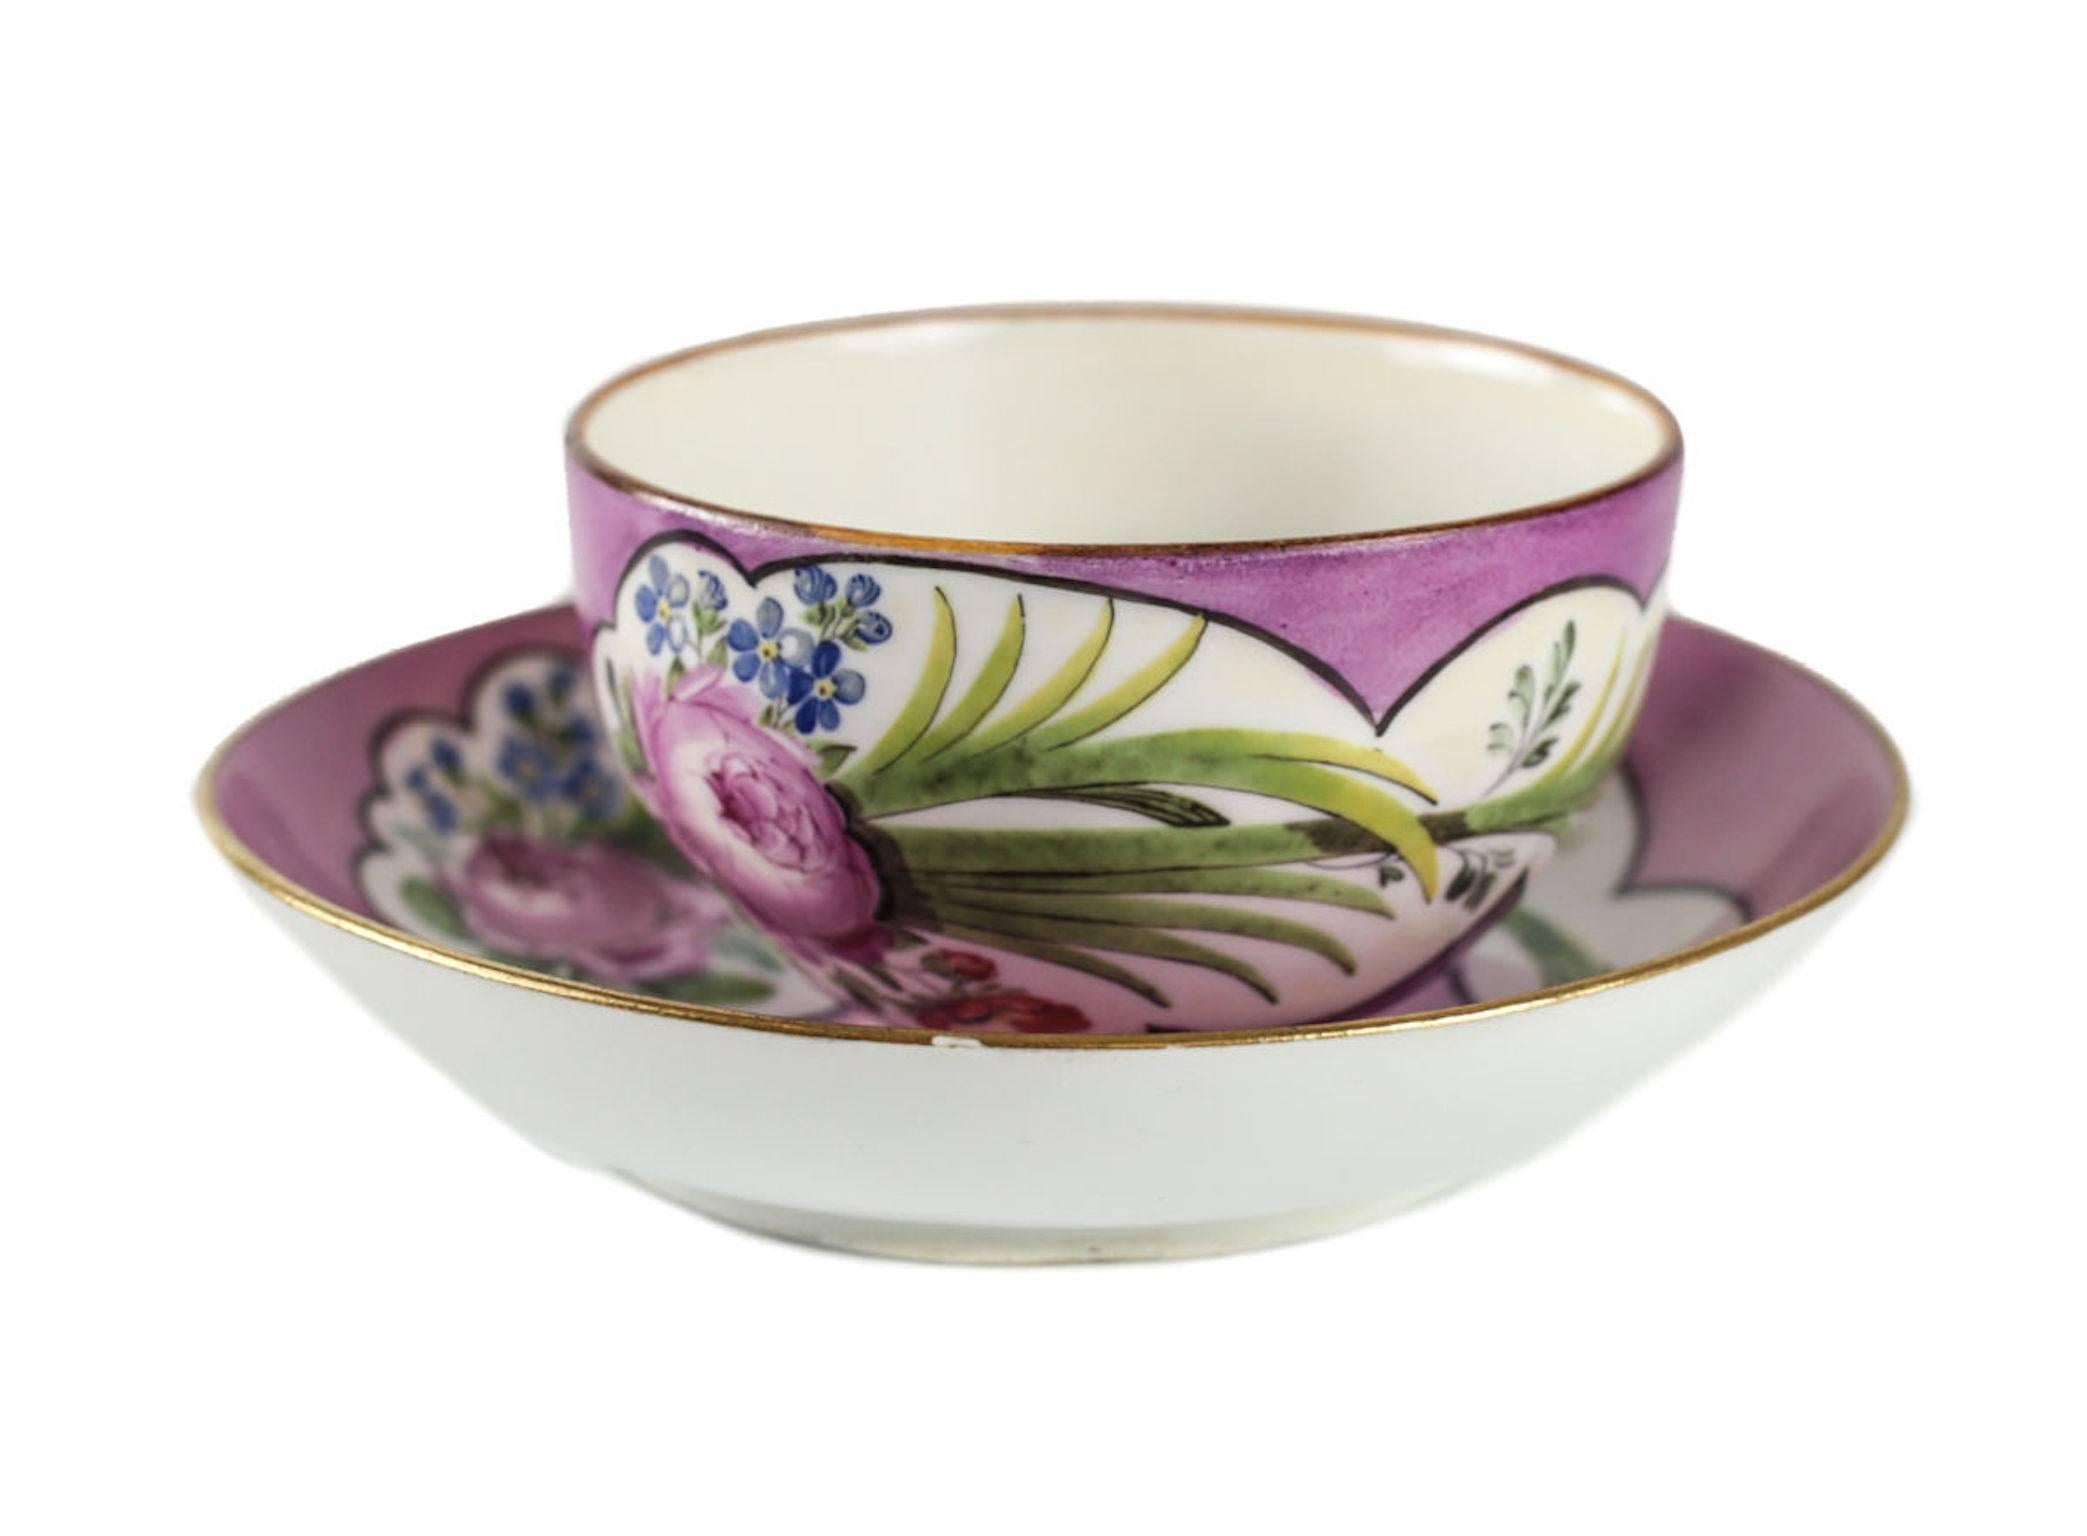 German Meissen Marcolini Porcelain Cup and Saucer Hand-Painted Pink Rose, circa 1800 For Sale